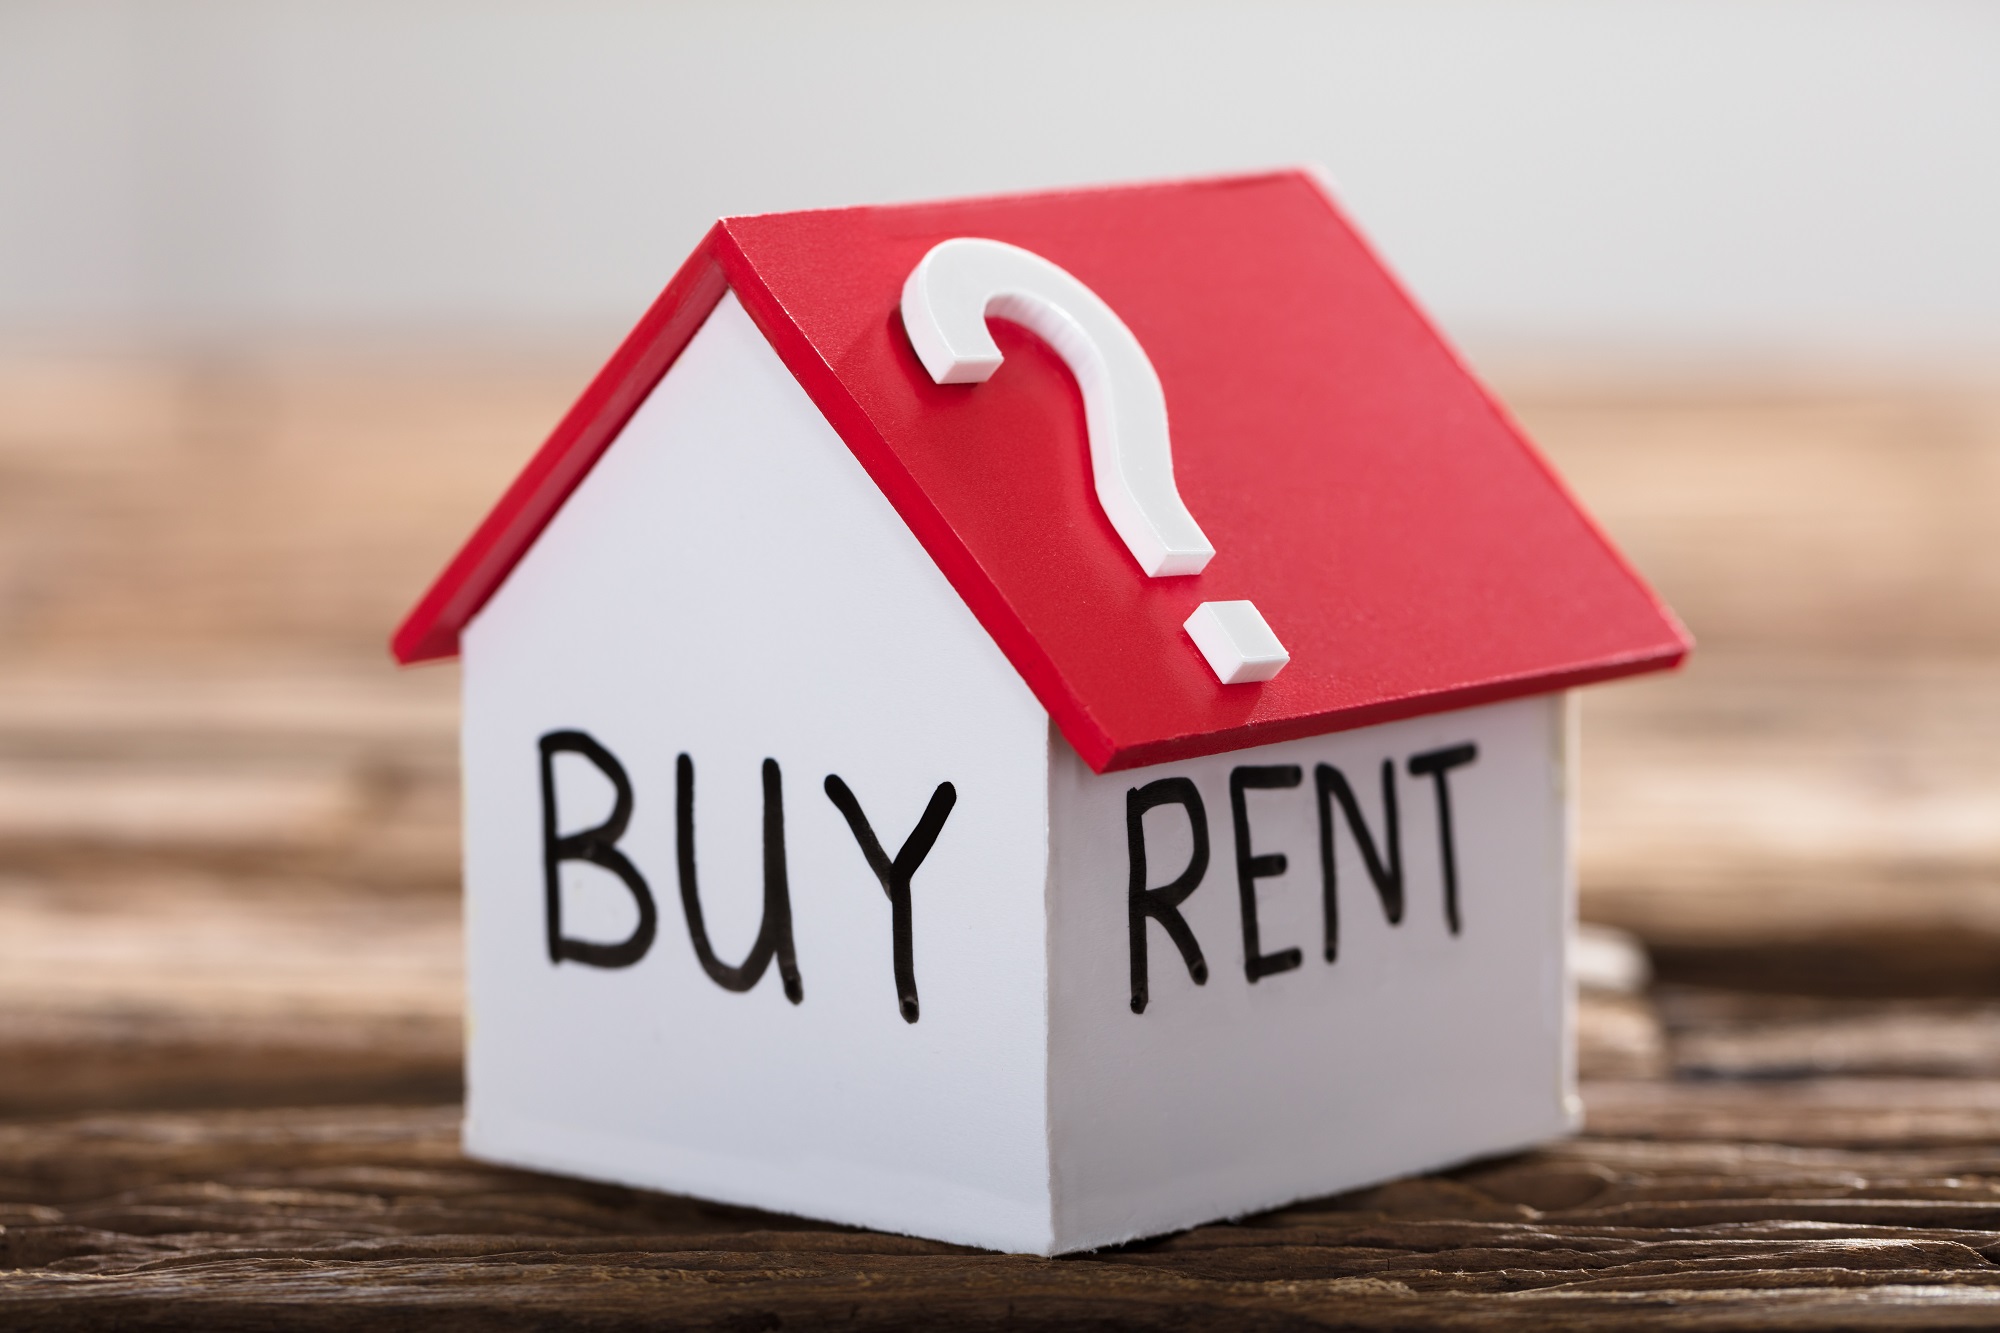 Should I rent or buy a home? Armstrong Advisory Group